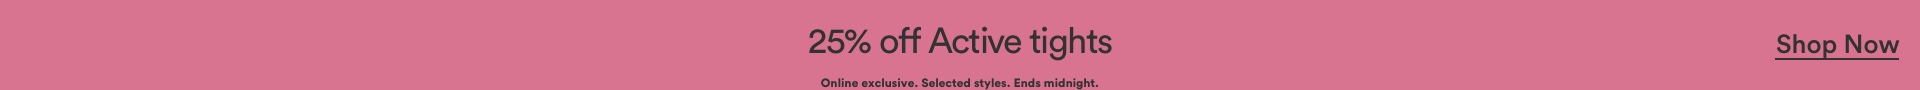 25% off Active Tights. Online exclusive. Selected styles. Ends midnight. Click to Shop Active Tights.